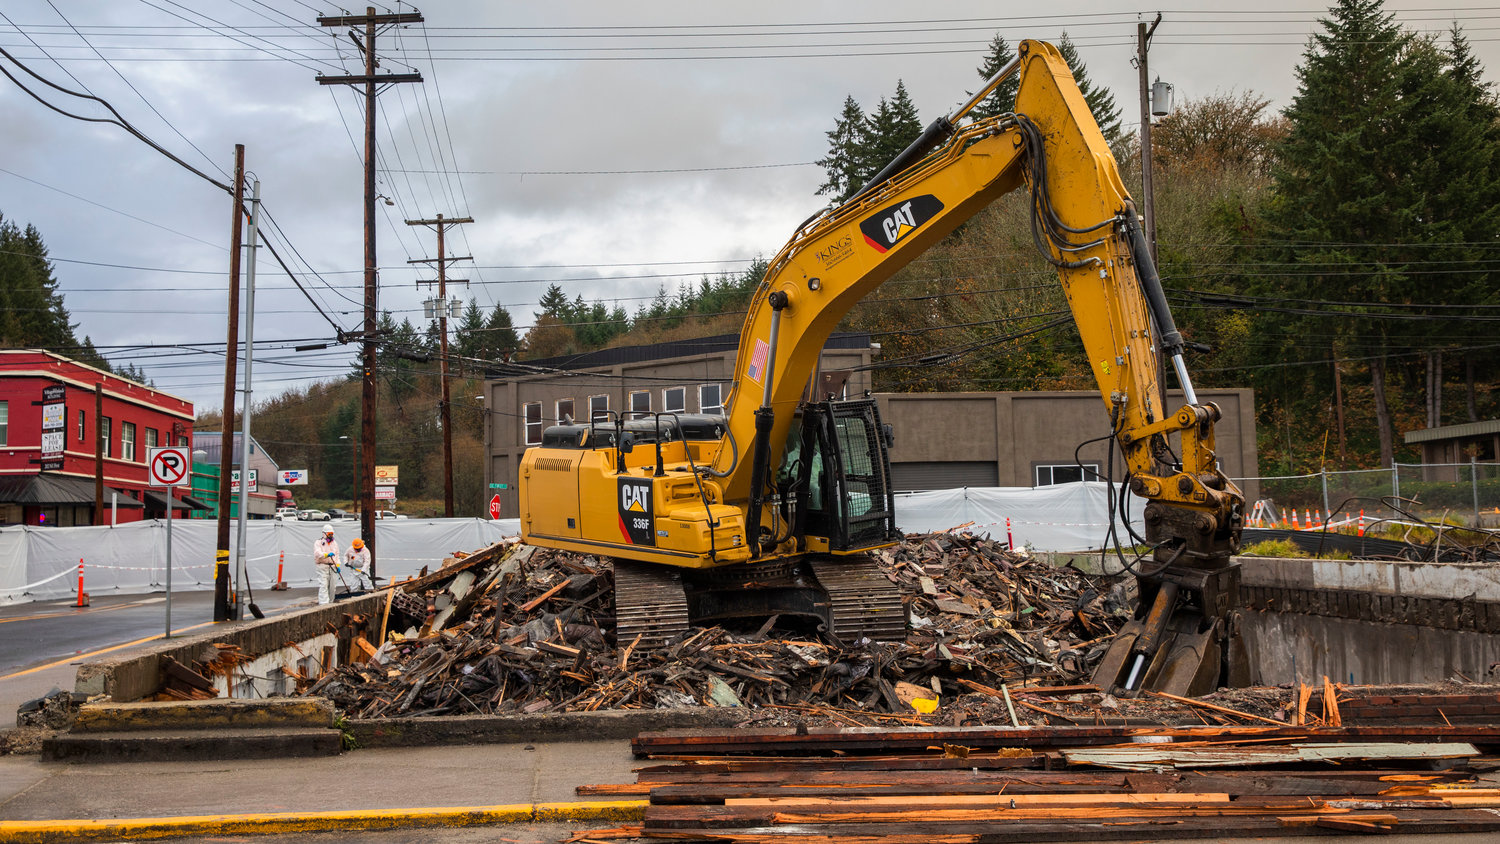 Demolition crews work to demolish the Winlock Haunted Hostel B&B and Hotel following a structure fire in the building.